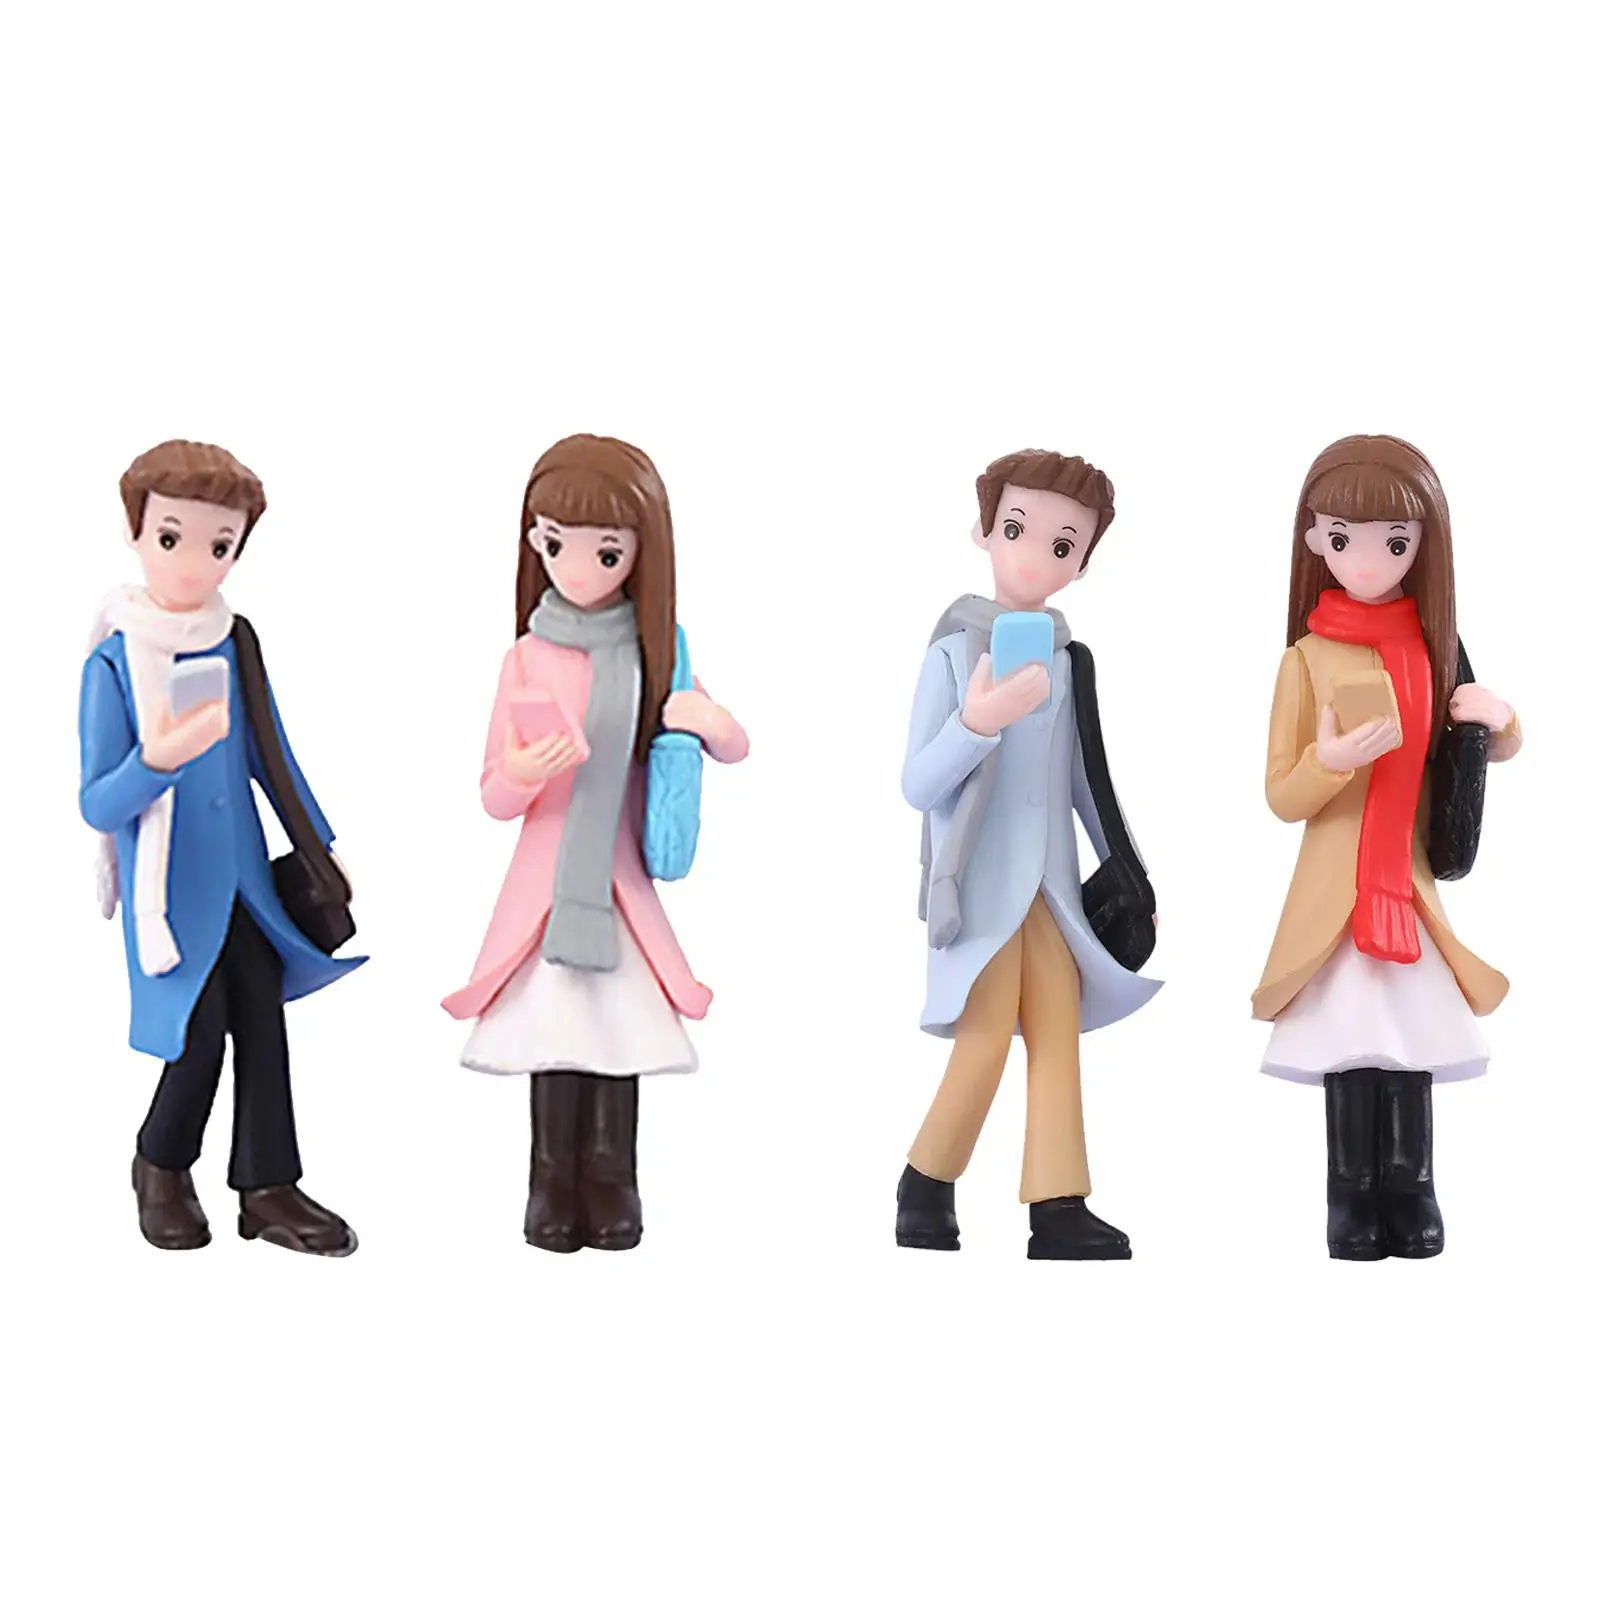 Phone Couple Miniature Realistic Collectibles Delicate People Figurines for Dollhouse Diorama Photography Props DIY Scene Layout